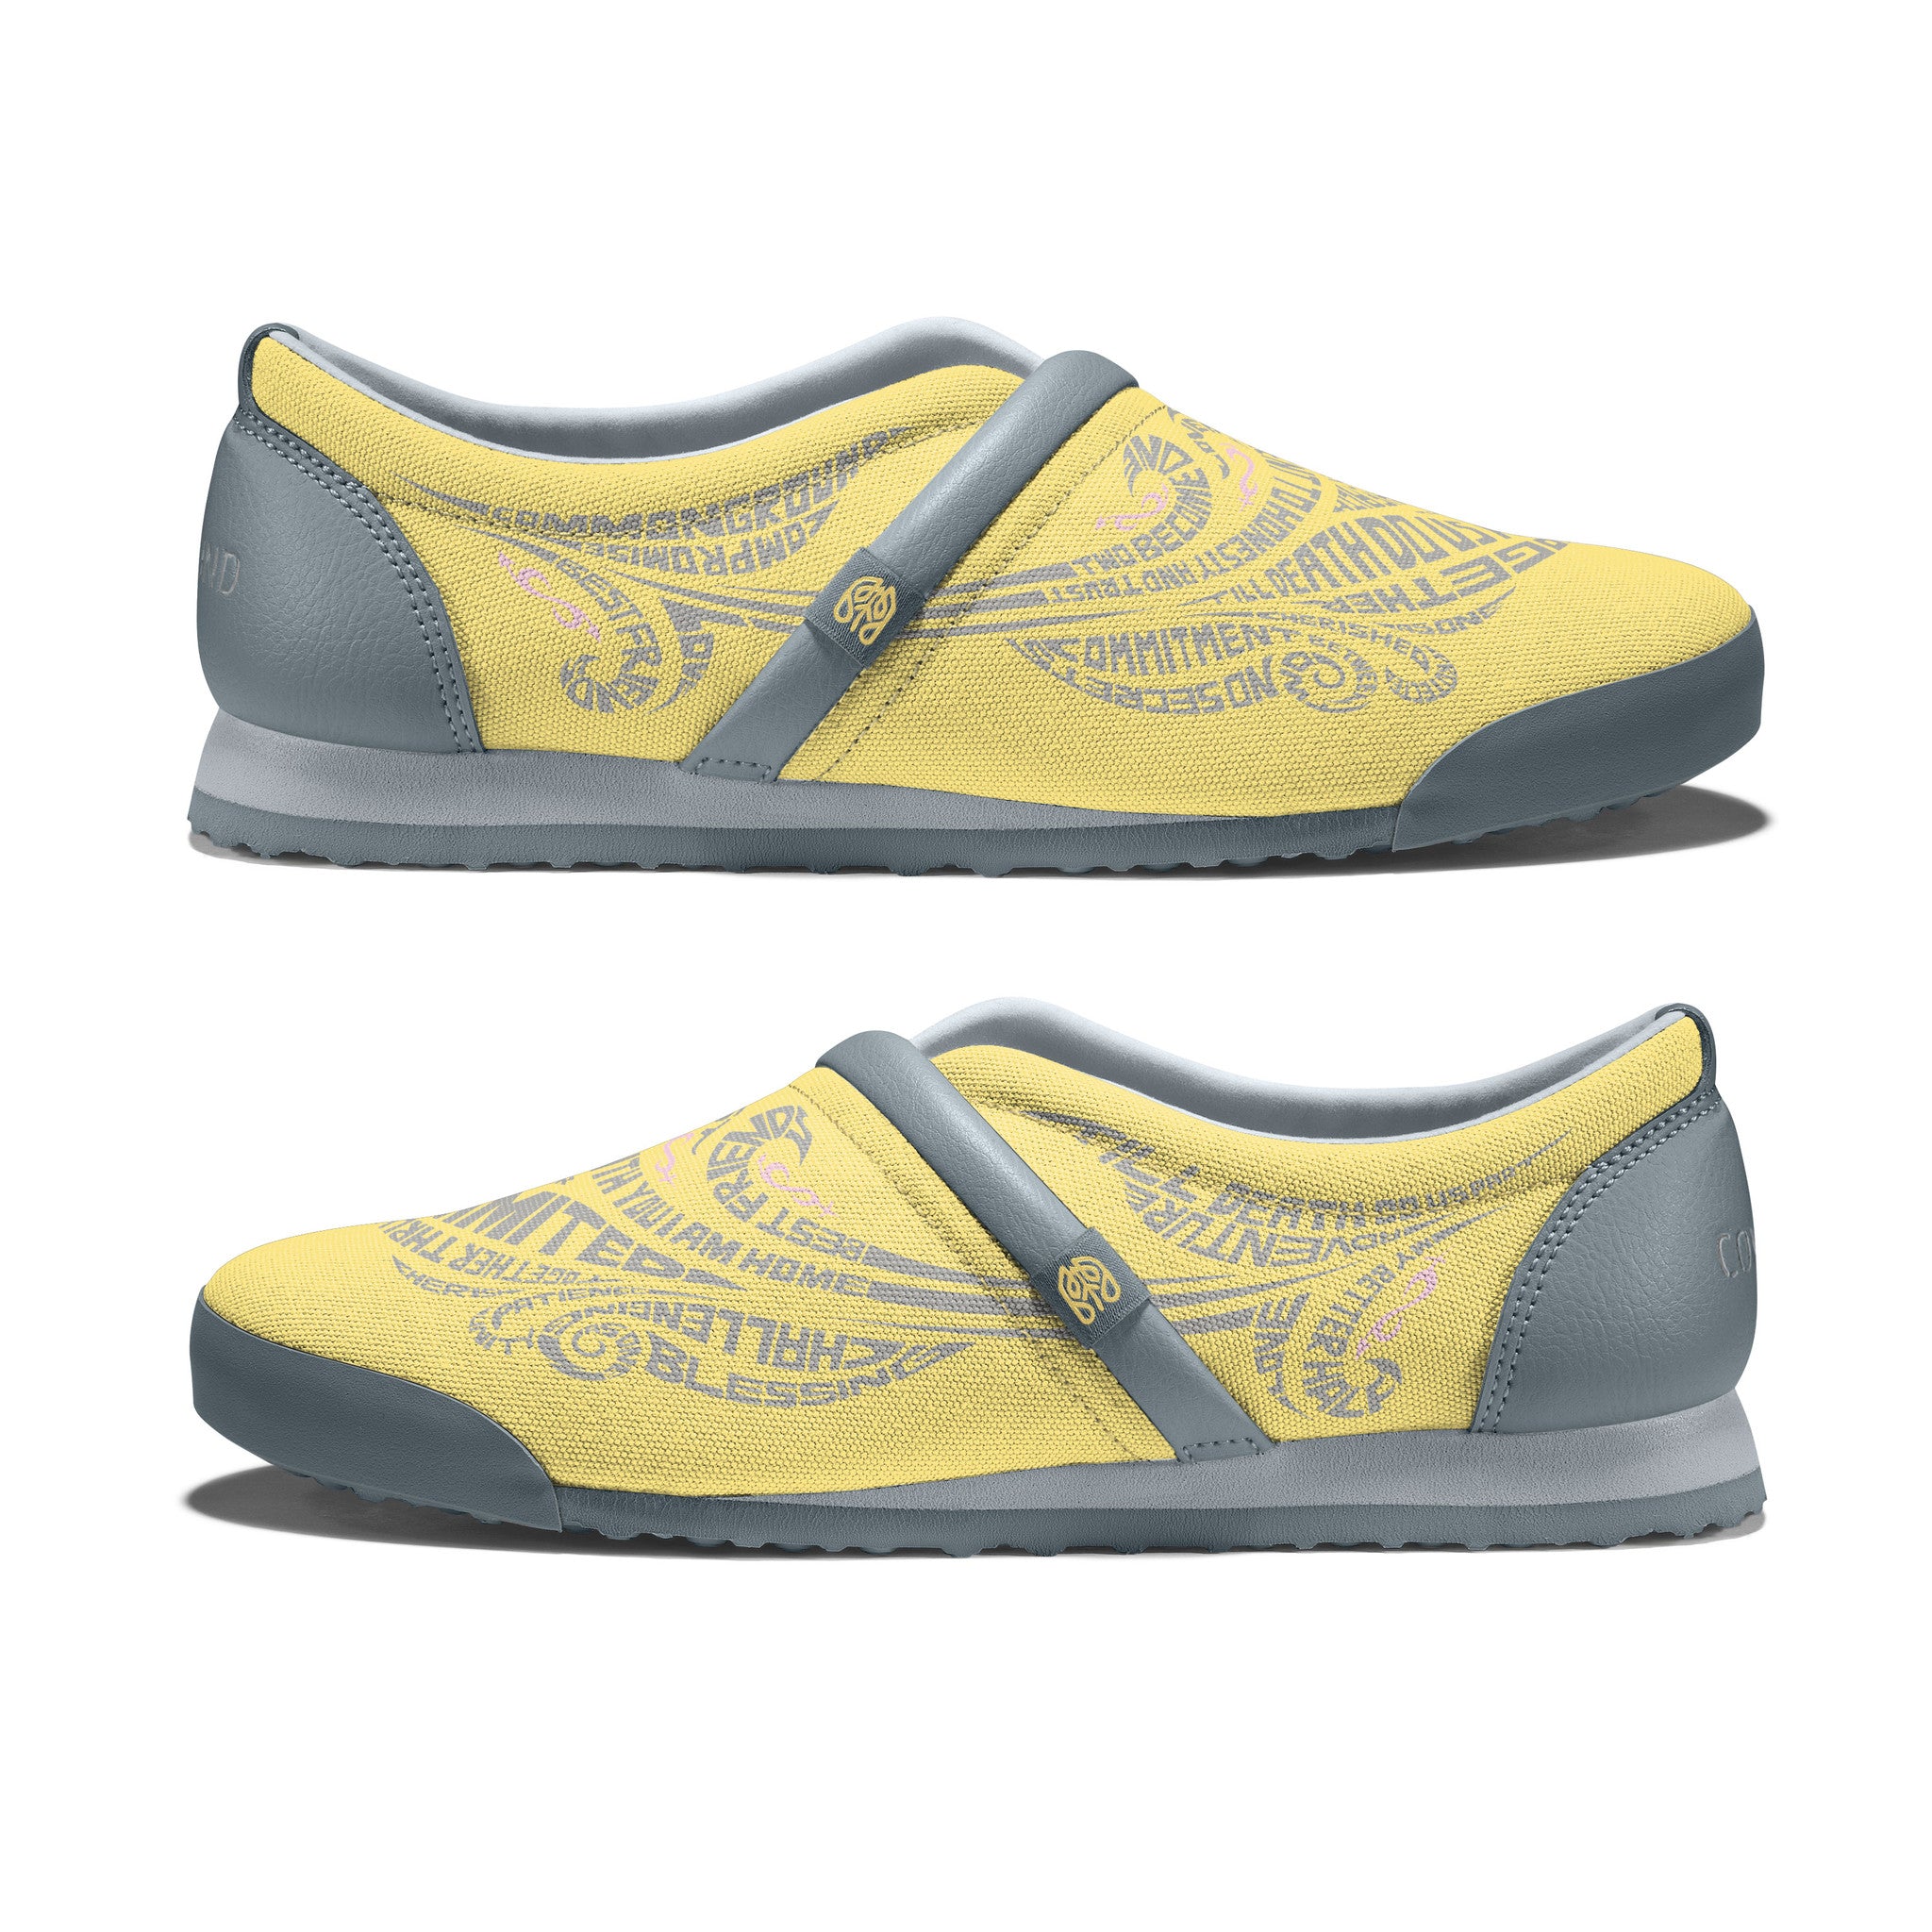 Goldfinch - Common Ground Footwear Shoes Side View